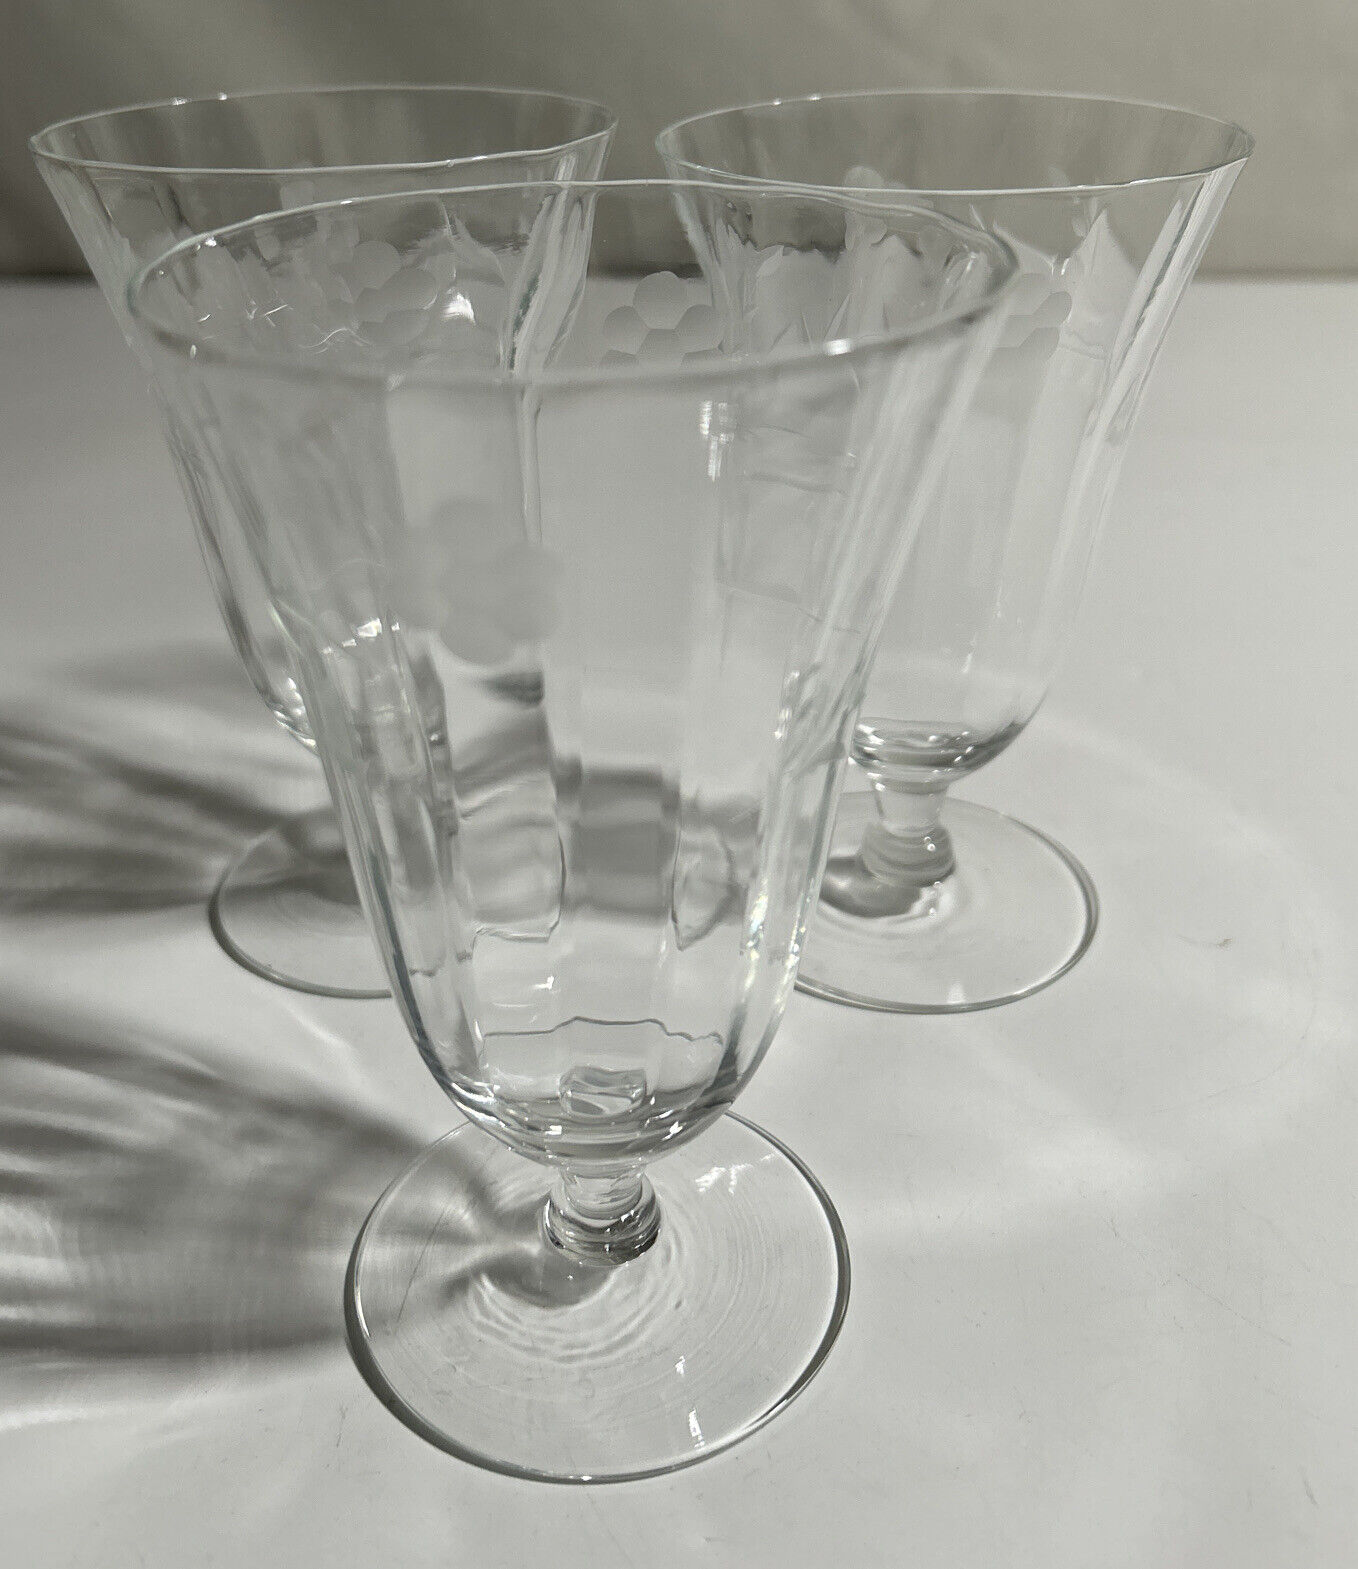 GORGEOUS Vtg Gray Cut - Floral Etched Iced Tea/Wine Glass Goblets. Set of 3.VGC